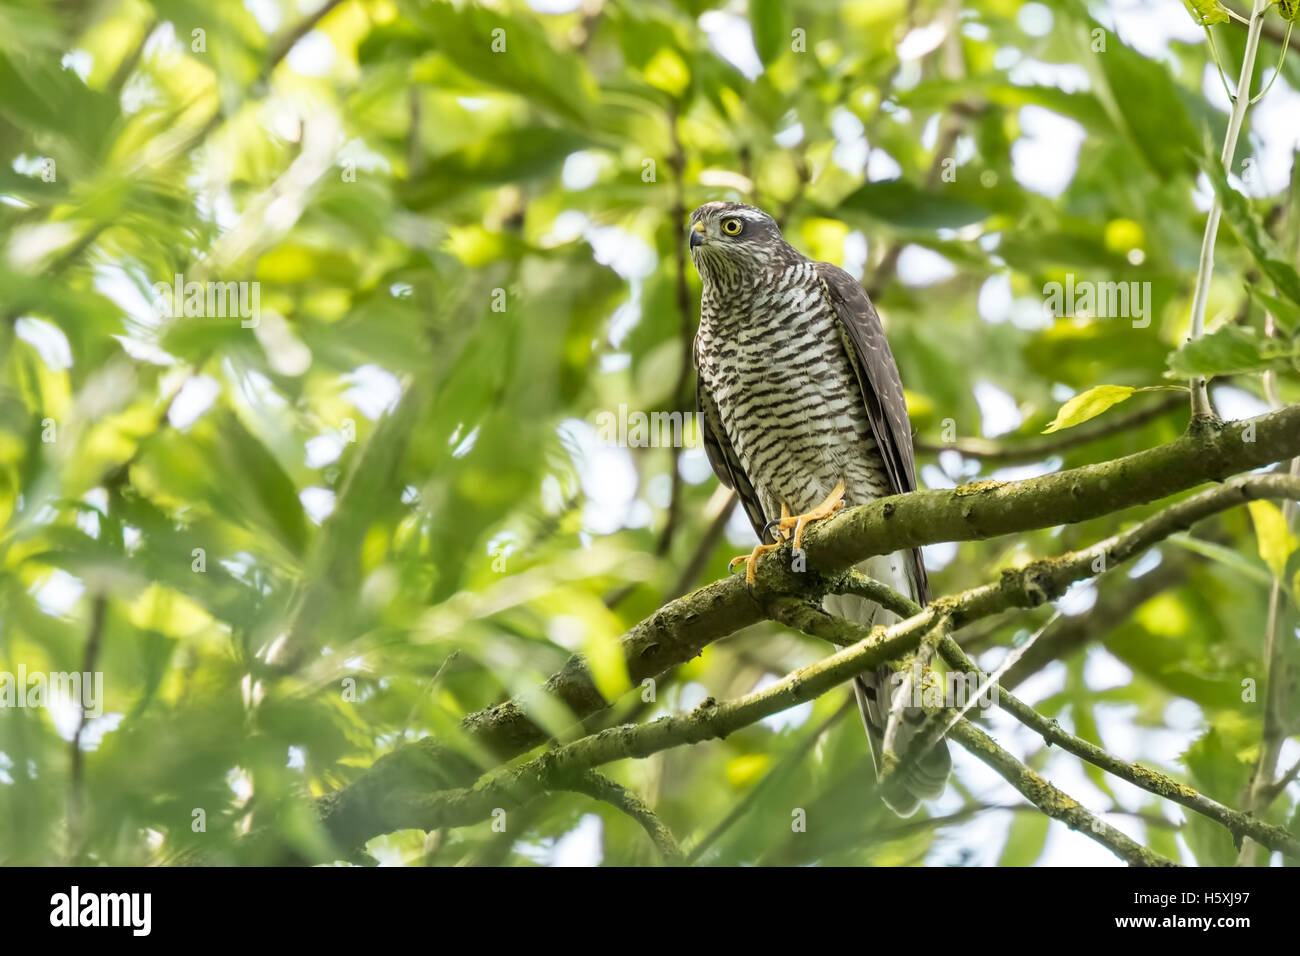 Close-up of a female goshawk, Accipiter gentilis. This bird of prey is perched on a branch in a green tree. Stock Photo